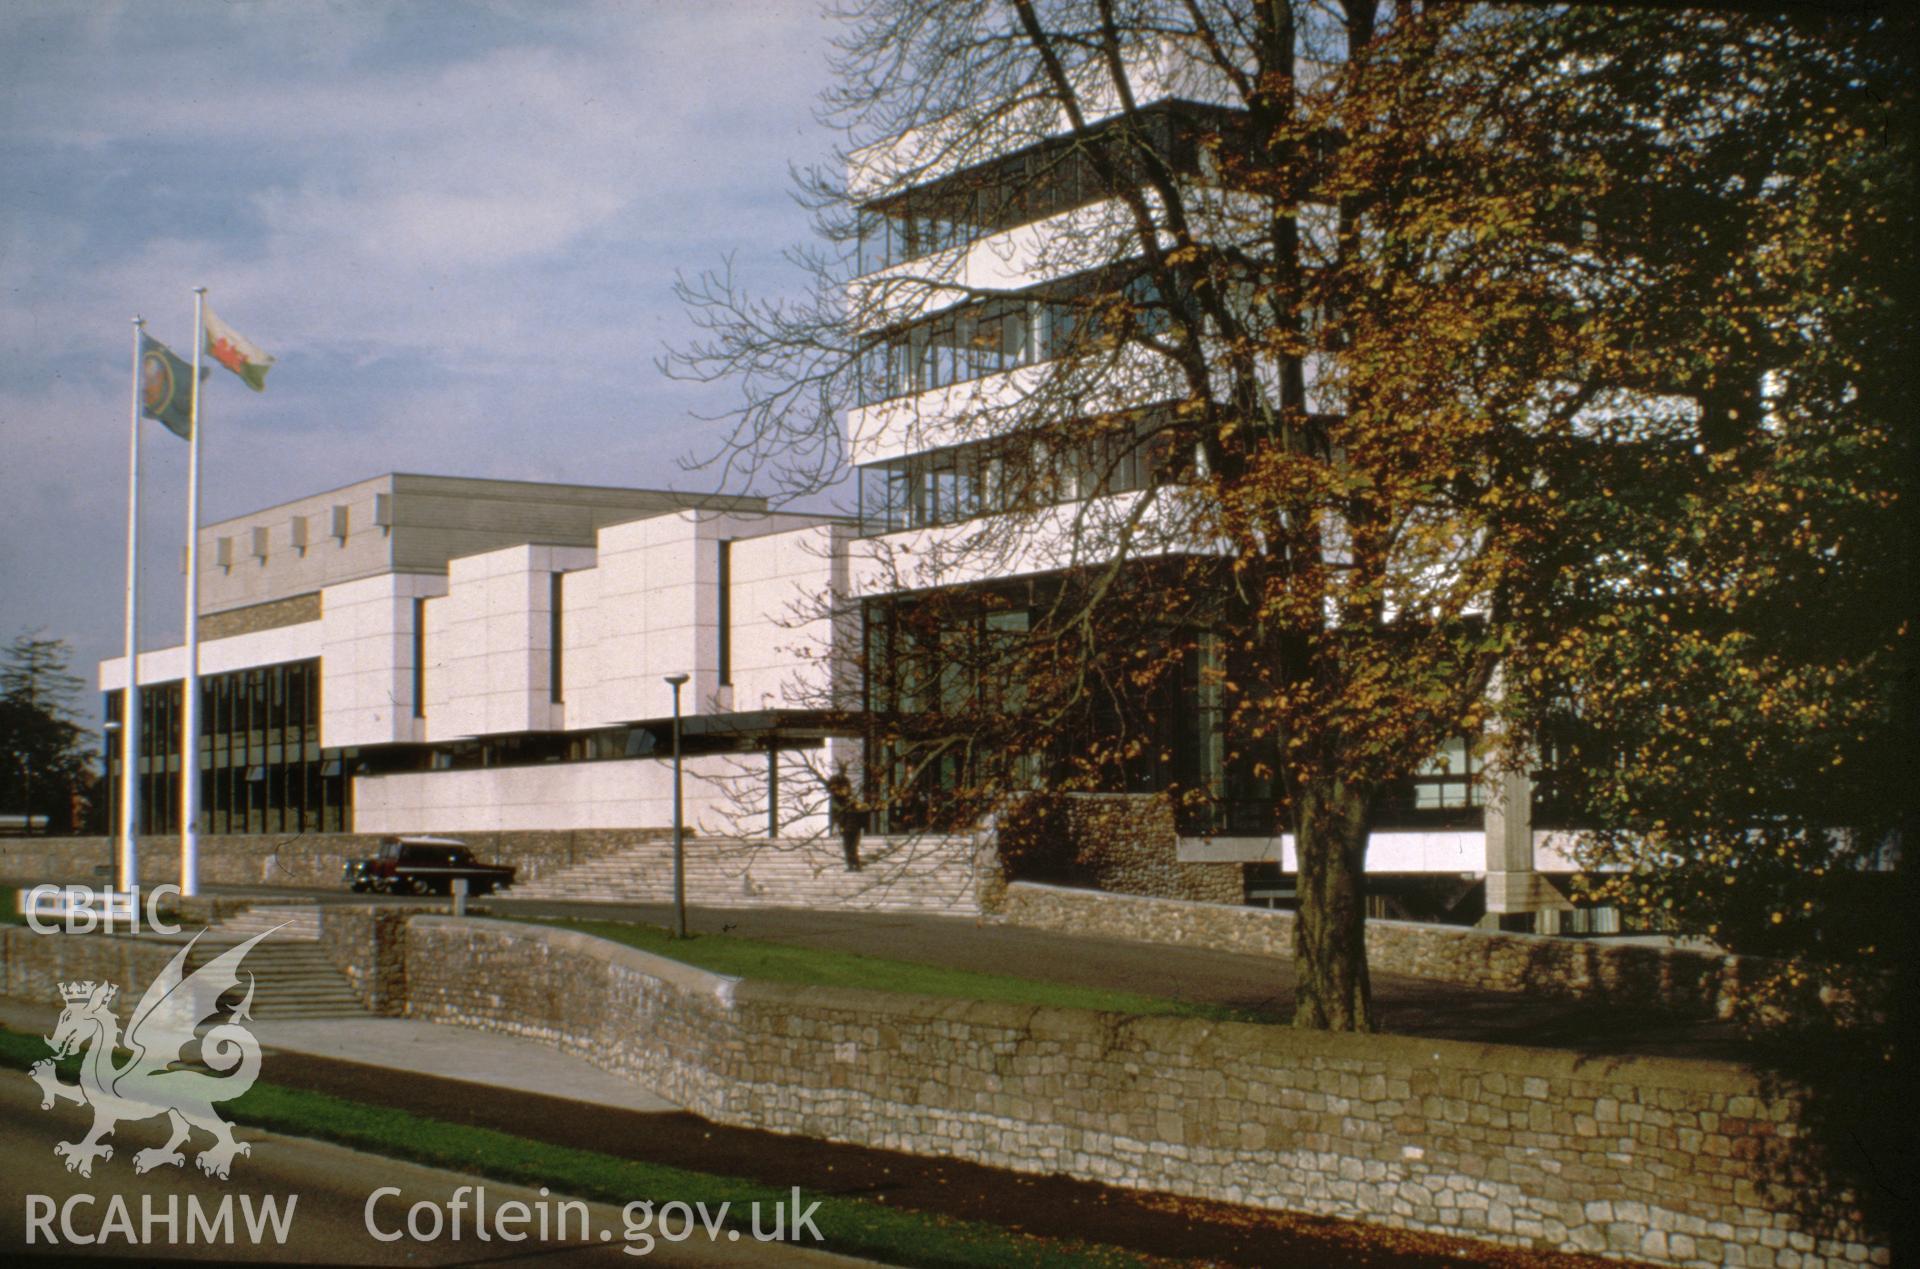 Exterior view of BBC Broadcasting House, Llandaff.